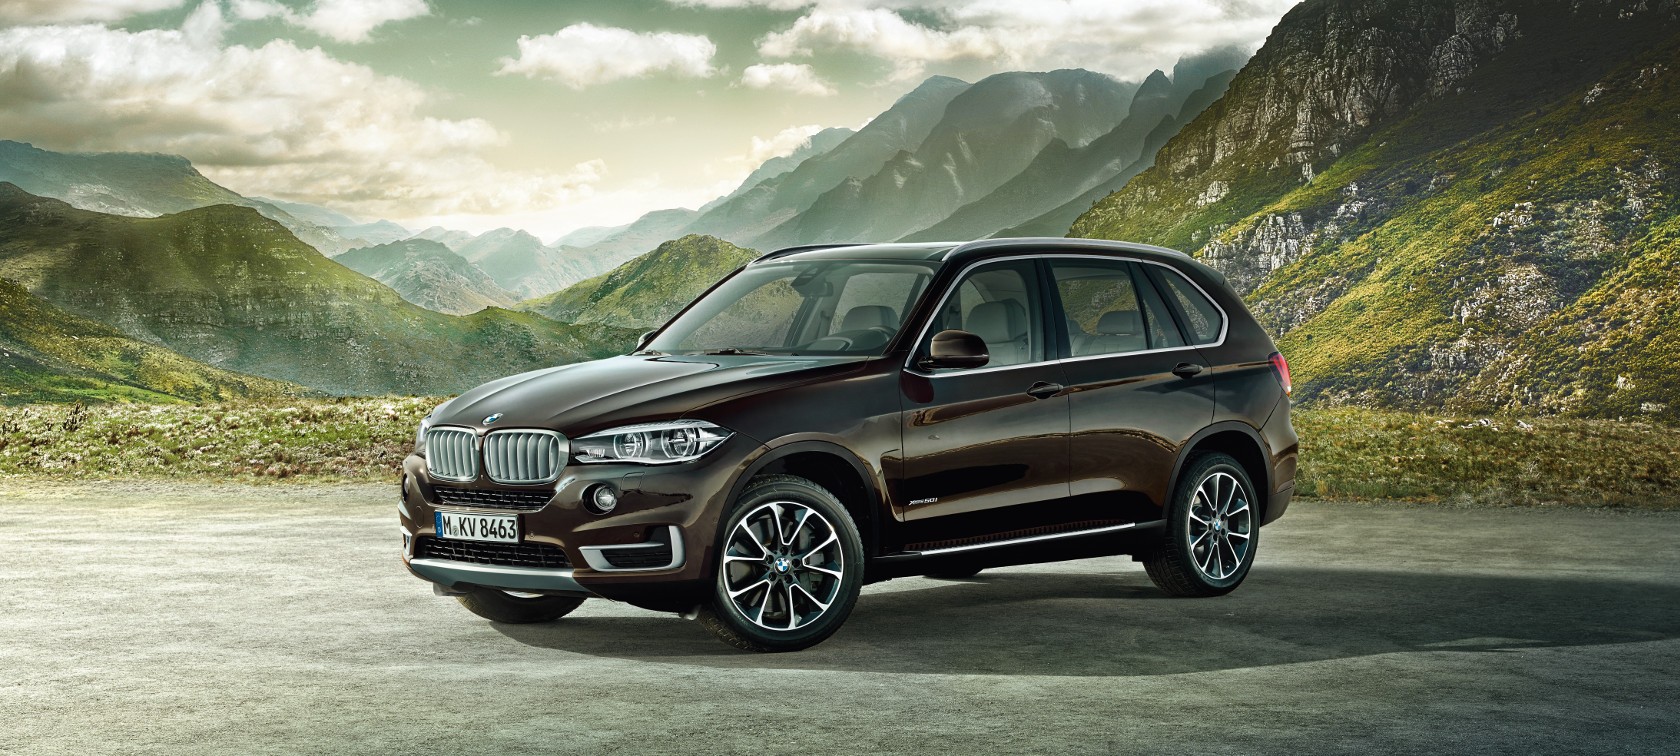 2014 BMW X5 Research Photos Specs and Expertise  CarMax